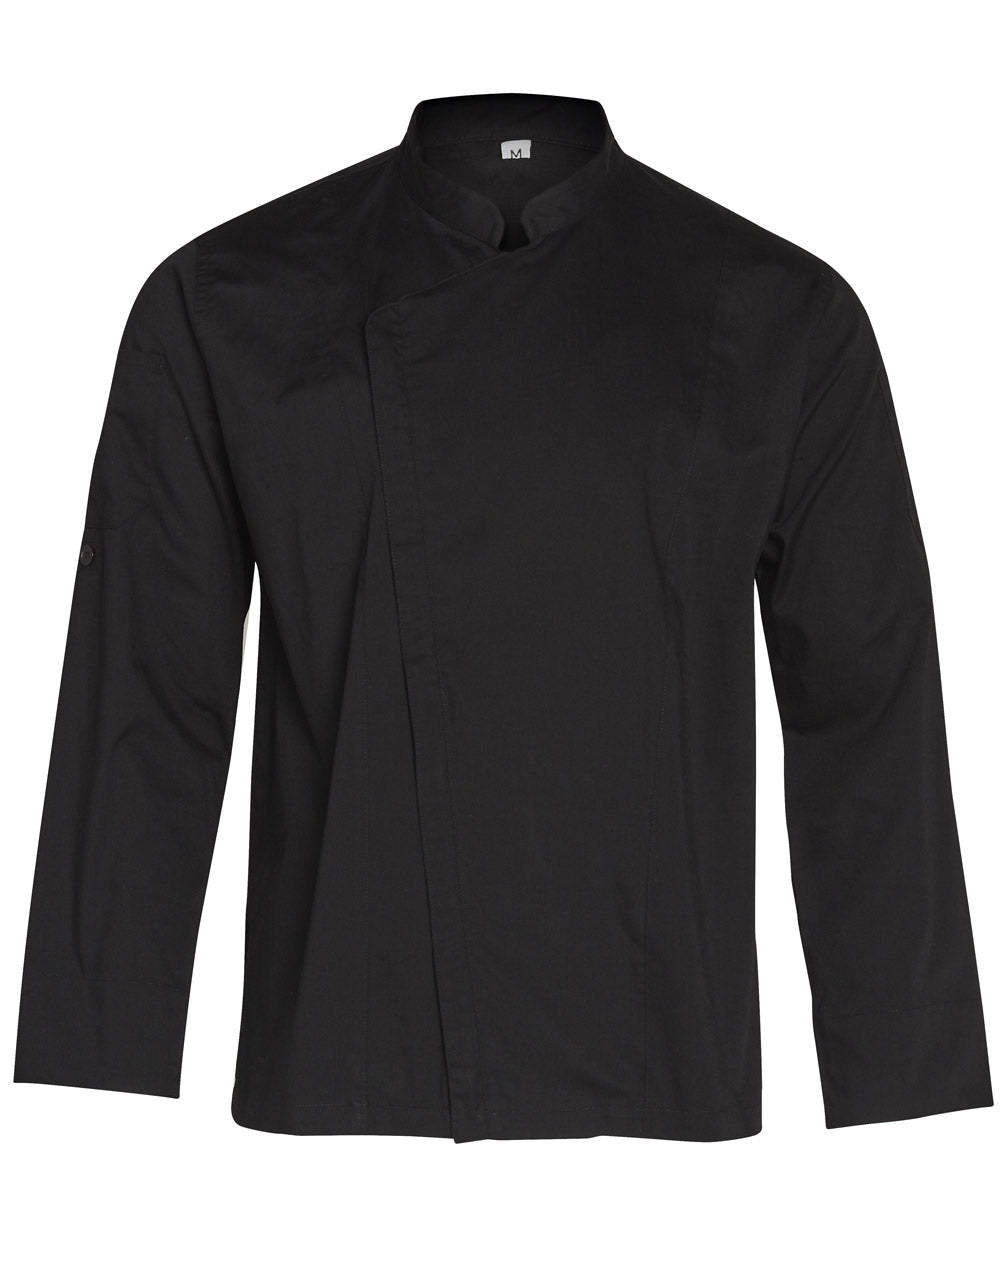 JCCJ03 MENS FUNCTIONAL CHEF JACKETS